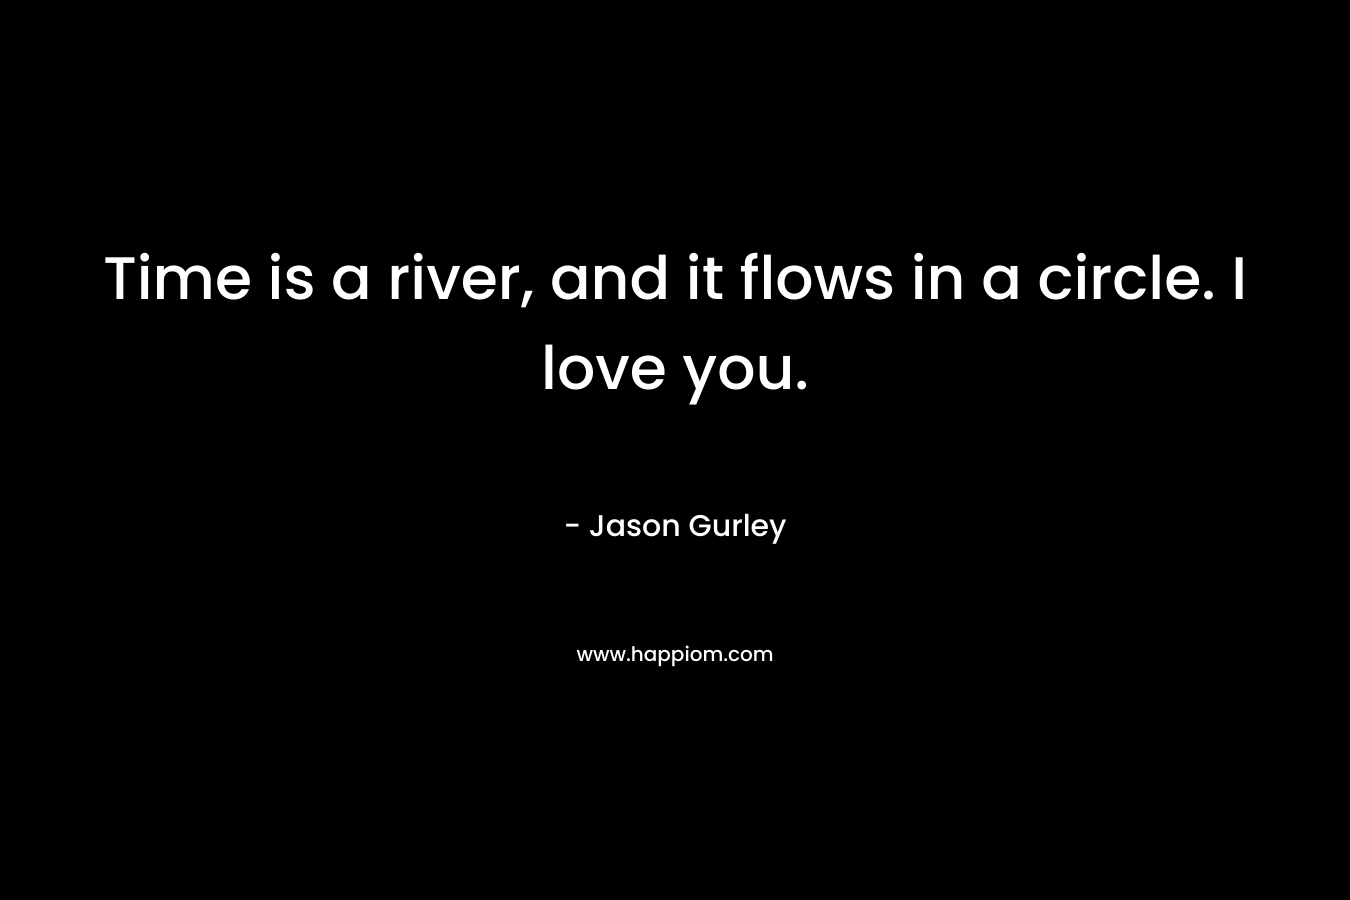 Time is a river, and it flows in a circle. I love you. – Jason Gurley